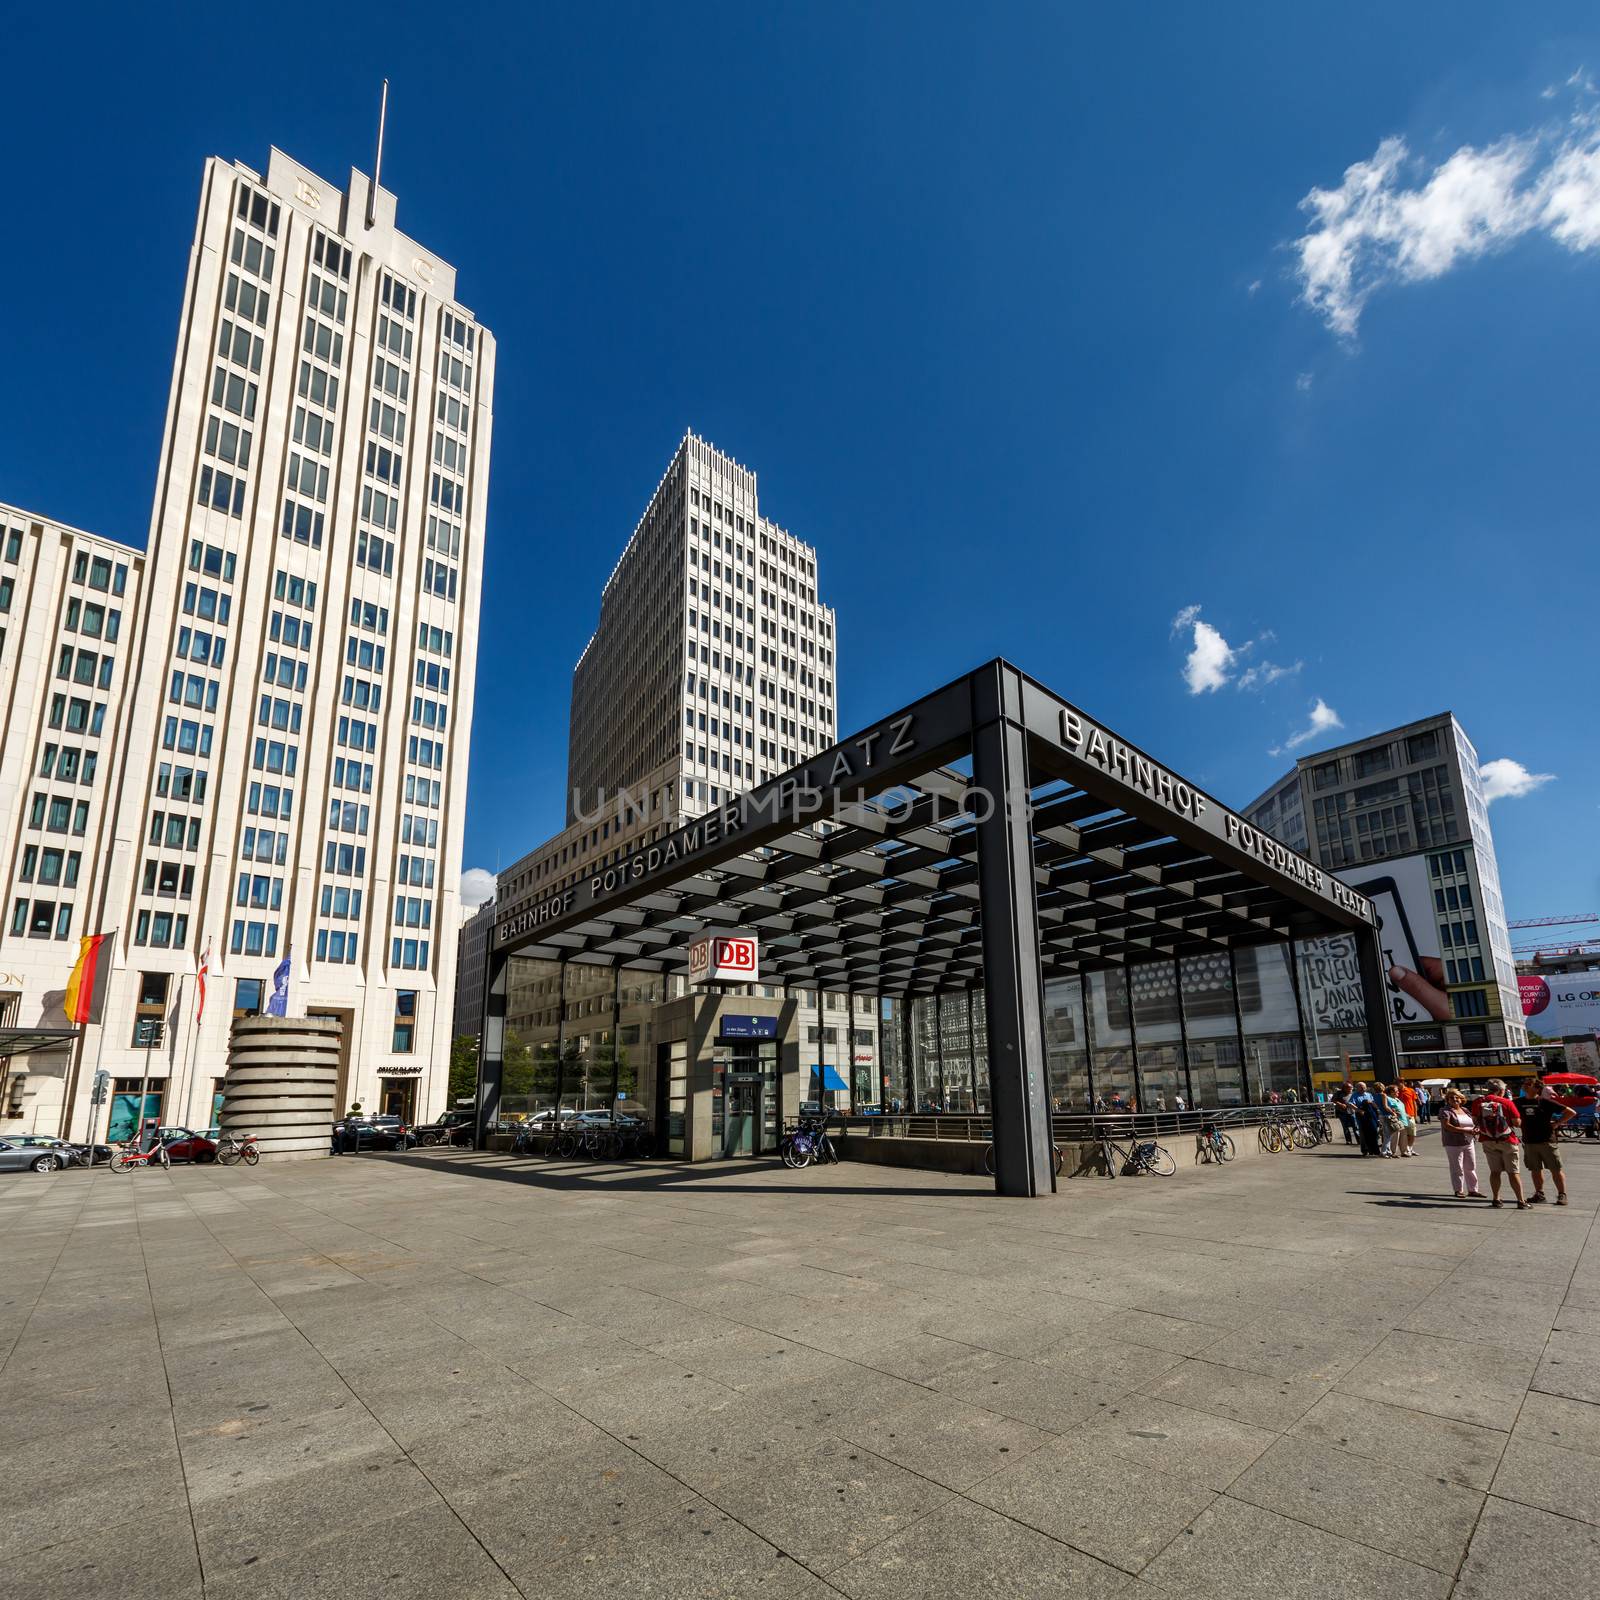 BERLIN - AUGUST 24: The Potsdamer Platz on August 24, 2013 in Be by anshar